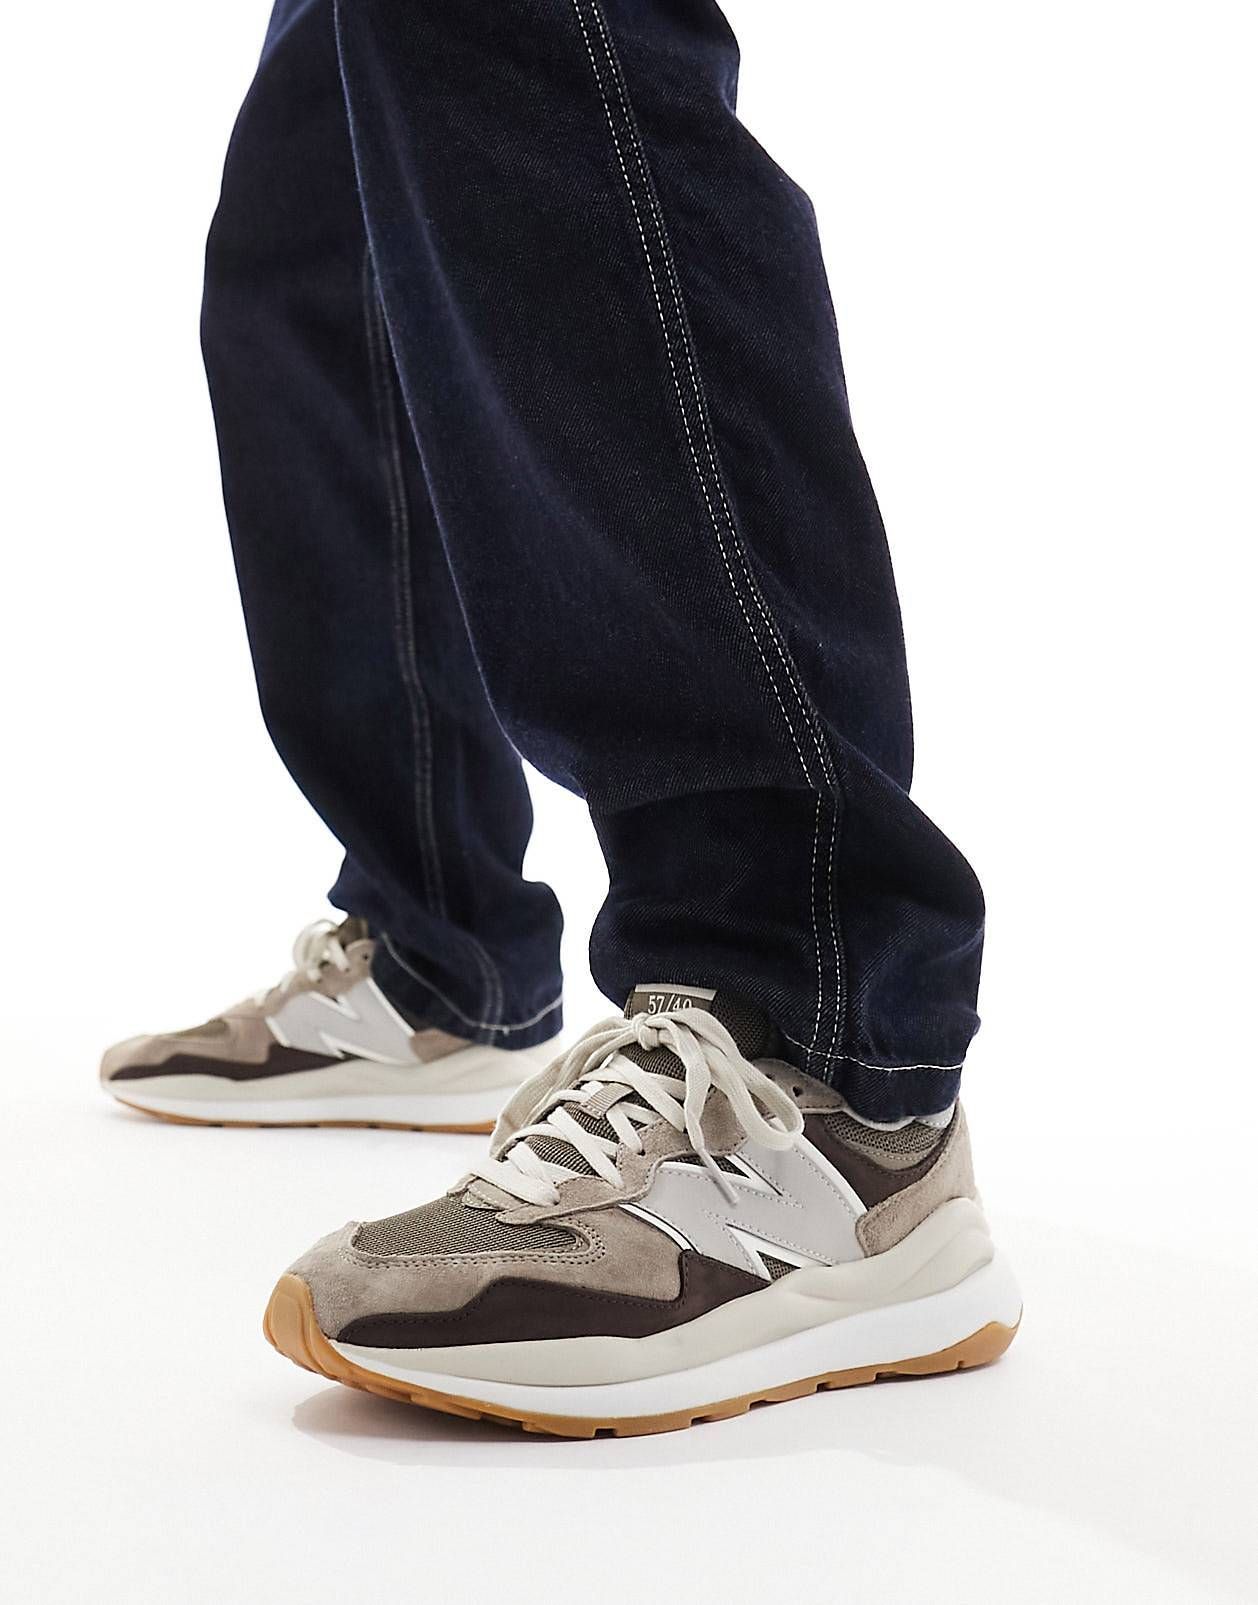 New Balance 57/40 sneakers in taupe with brown detail | ASOS (Global)